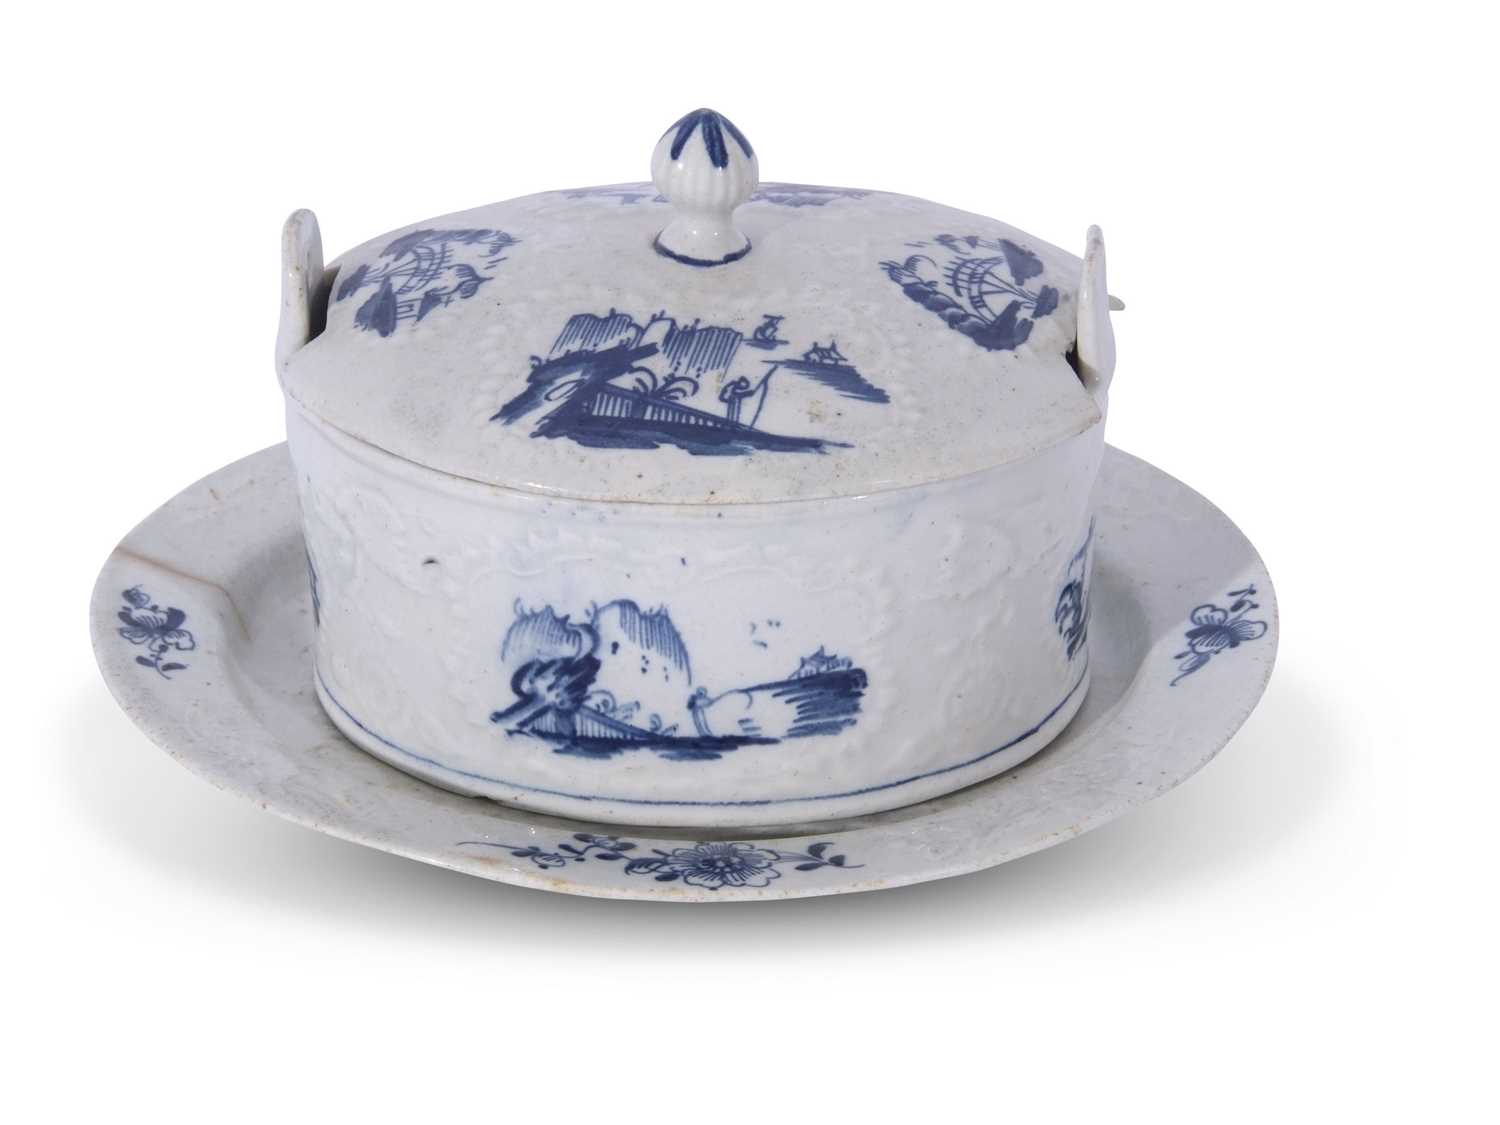 Lowestoft porcelain butter tub, cover and stand circa 1765, the tub moulded with flowers enclosing